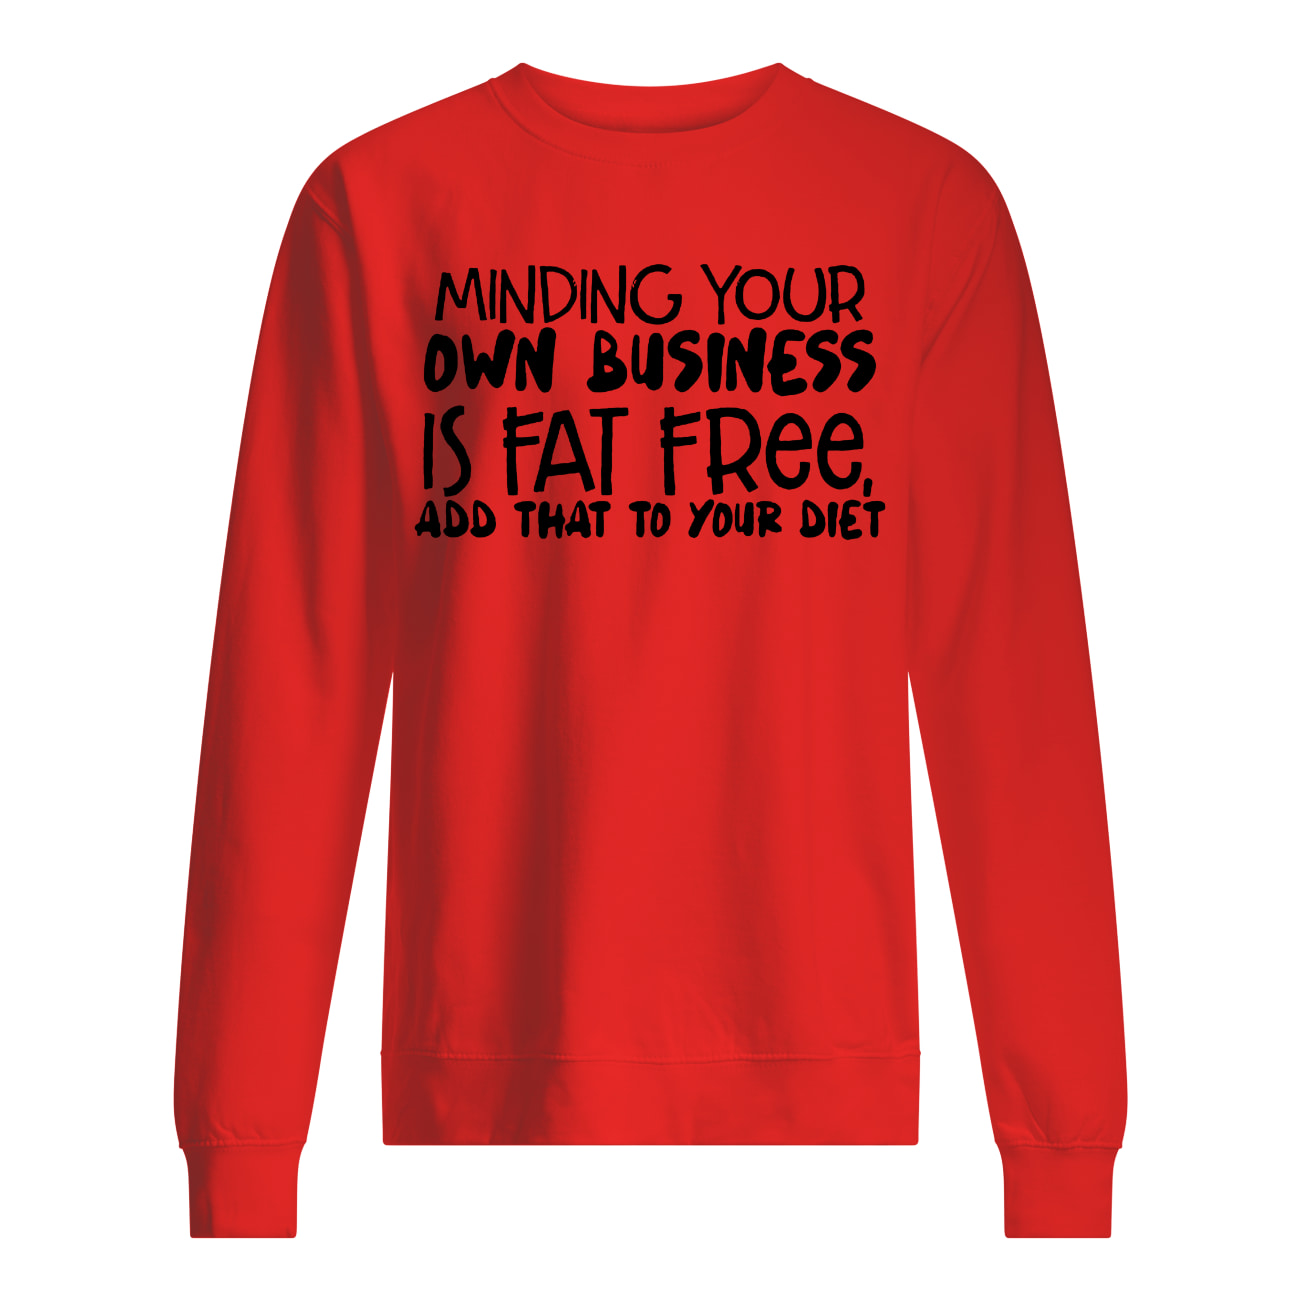 Minding your own business is fat free add that to your diet sweatshirt